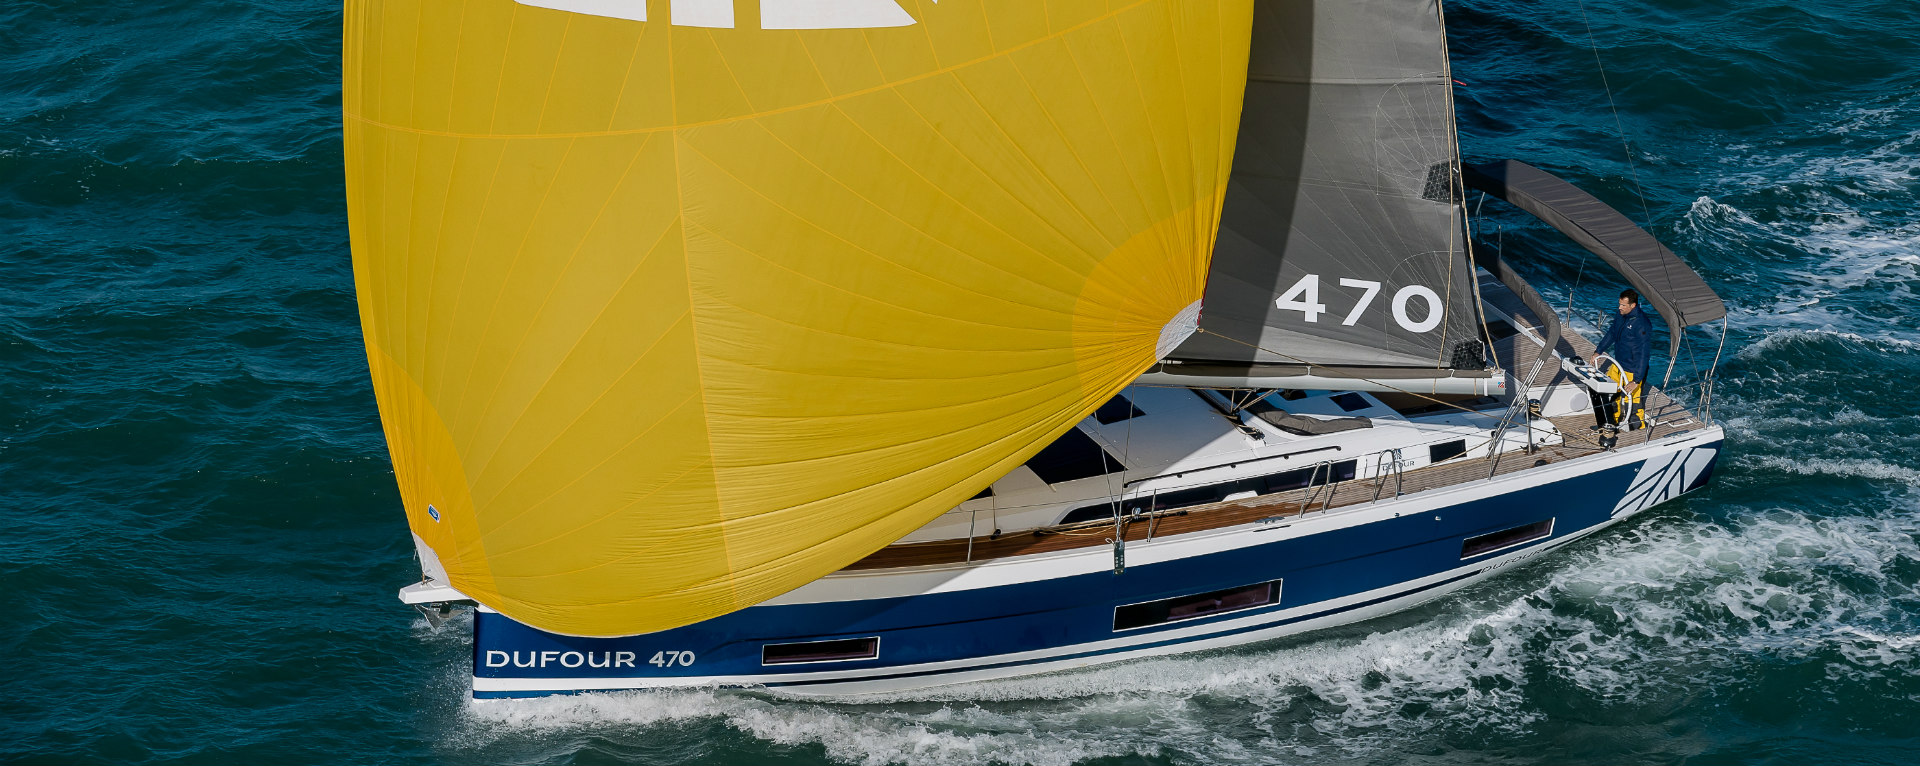 An exceptional cruising yacht 